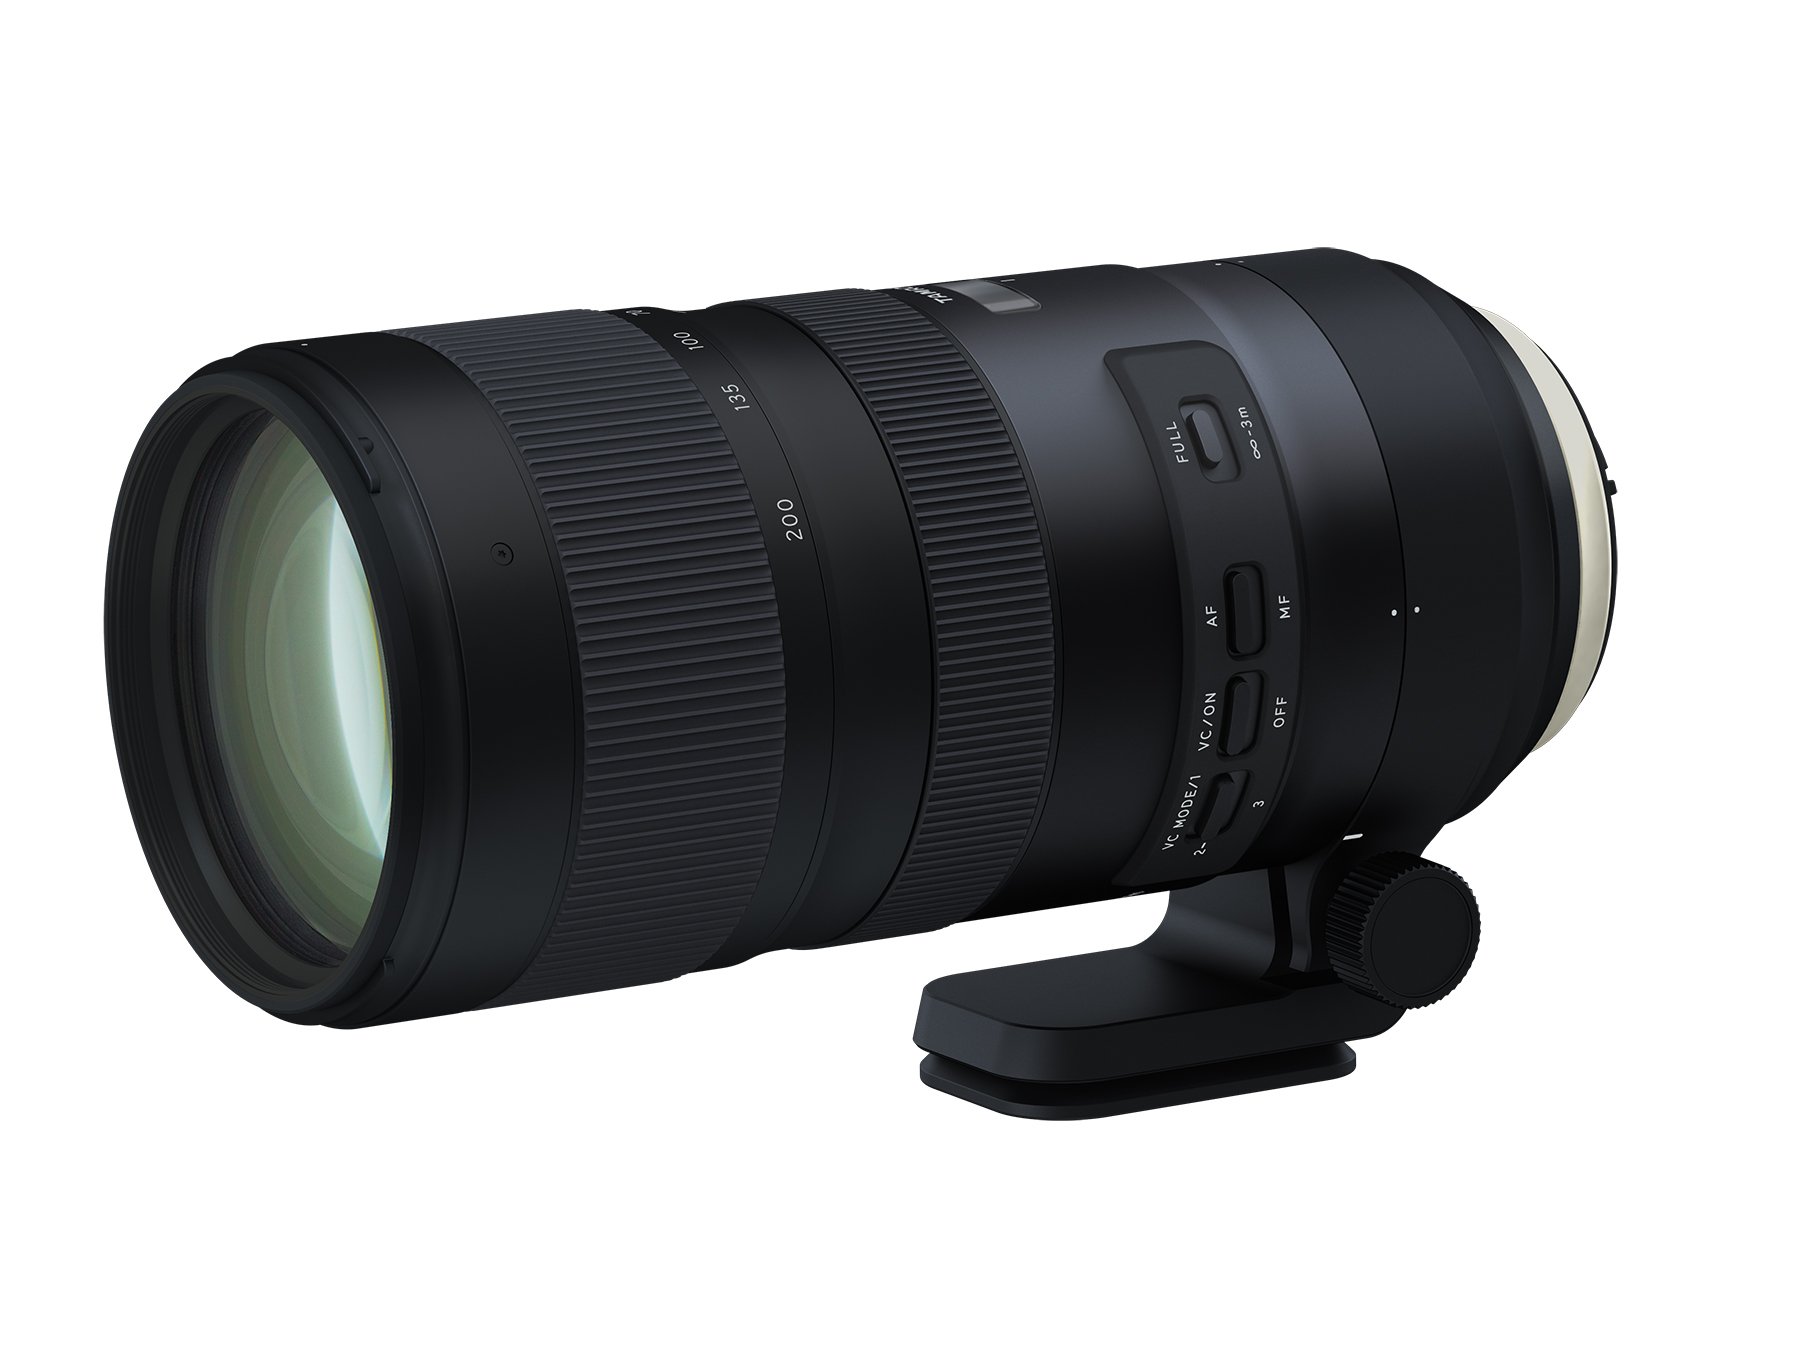 Tamron SP 70-200mm F/2.8 Di VC G2 for Nikon FX DSLR (6 Year Limited USA Warranty for New Lenses Only)